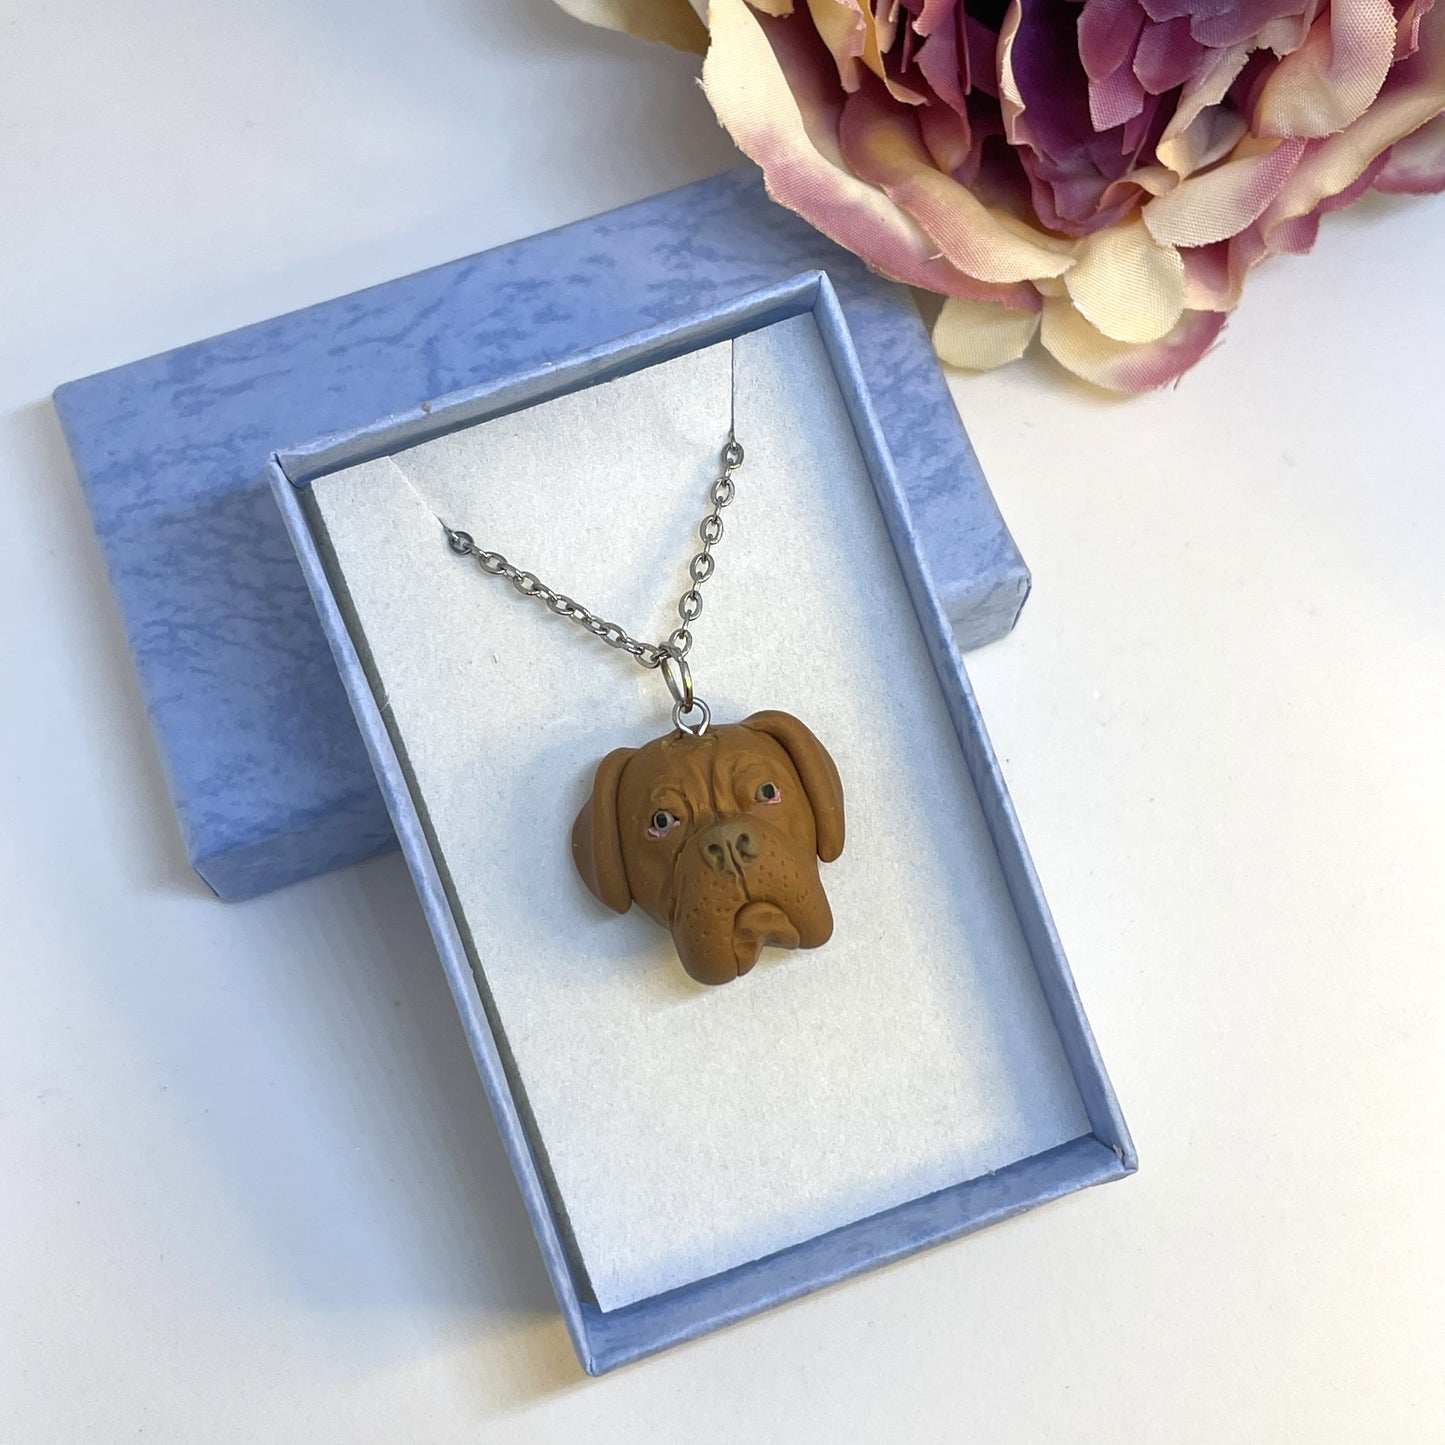 Handmade custom Dogue De Bordeaux necklace pendant on chain, in blue display box in front of faux pink flower.